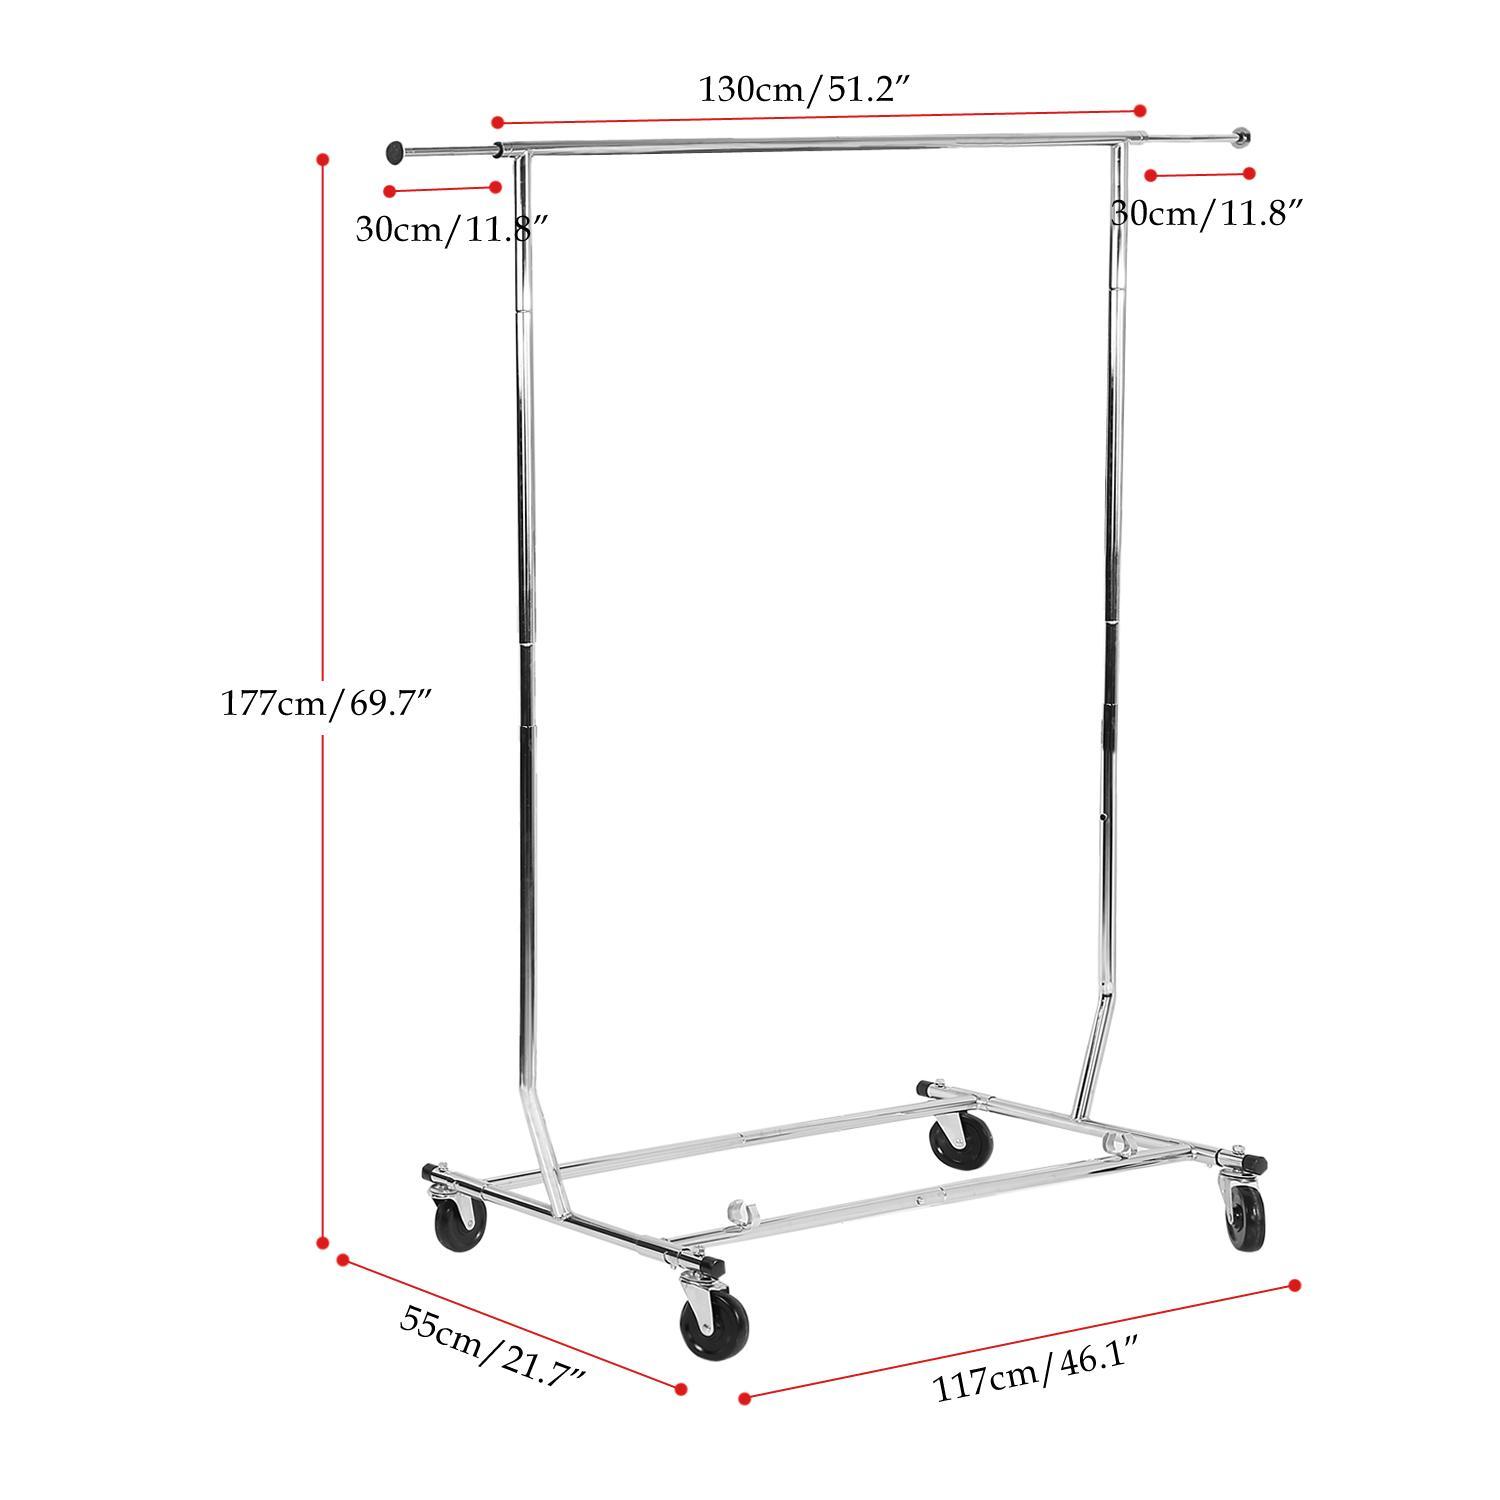 Whitmor Adjustable Rolling Garment Rack - Collapsible - Chrome - 22" x 51" x 71.25" - image 4 of 7